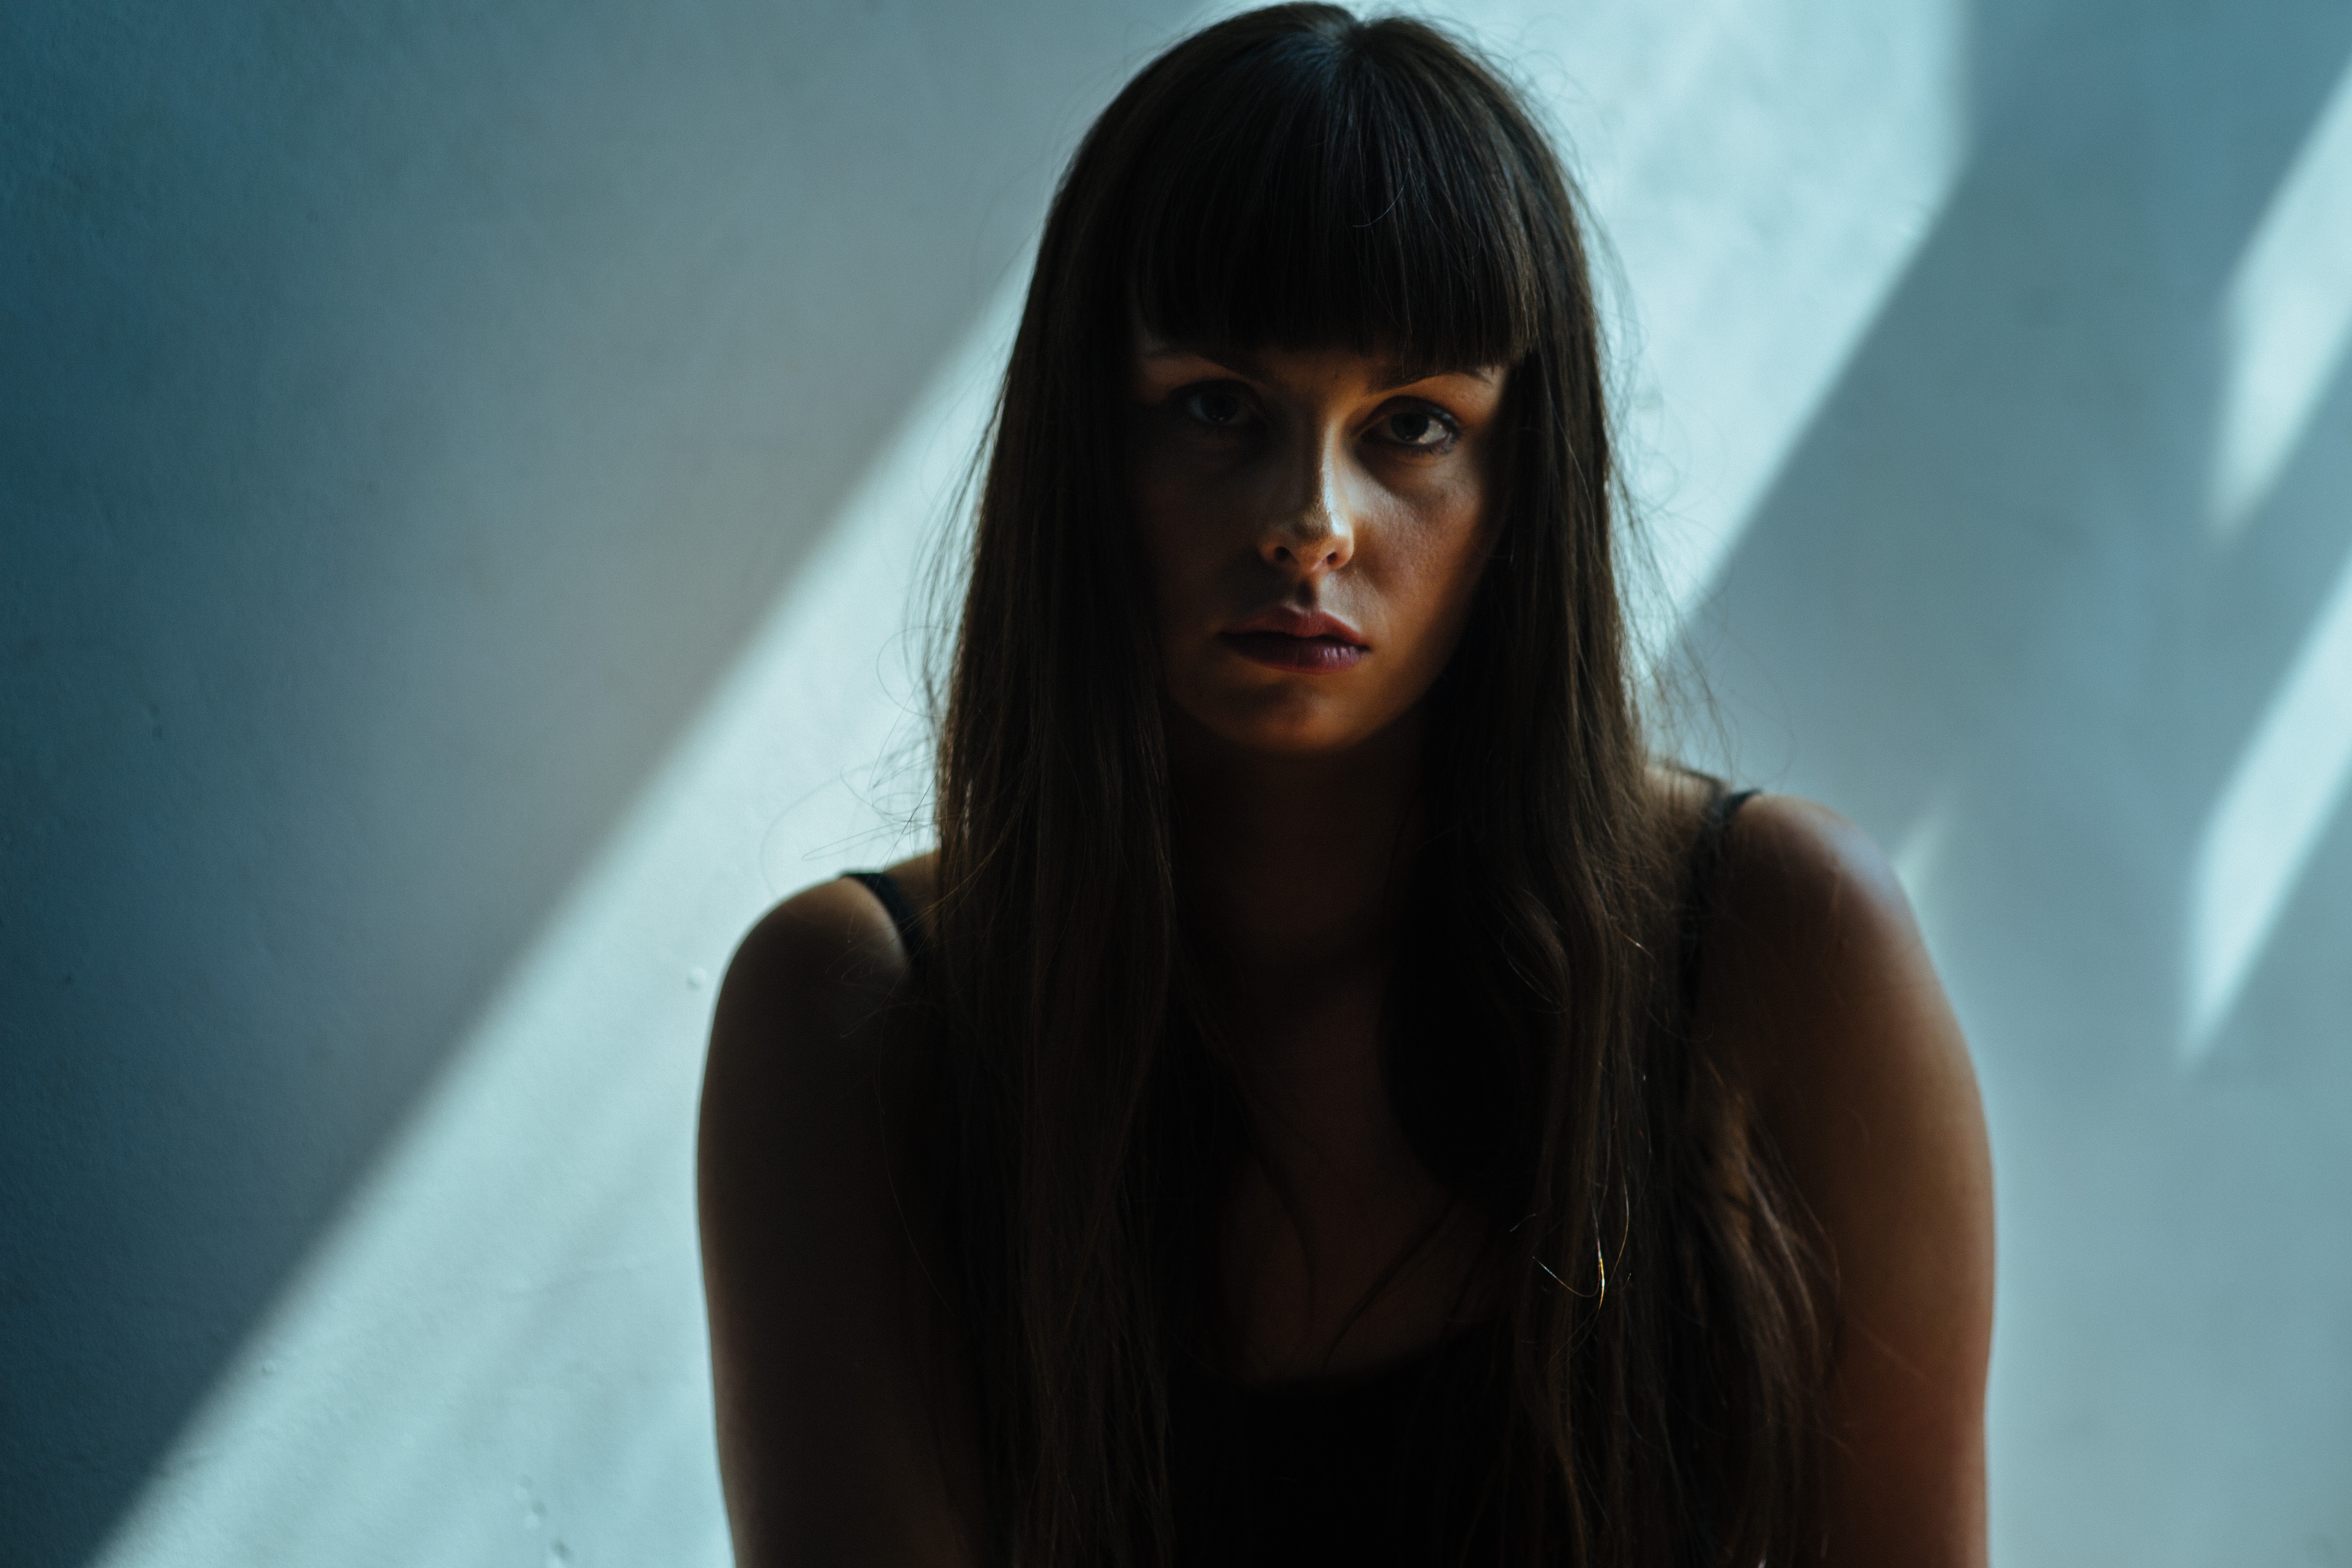 Video of the Week: Siv Jakobsen – Like I Used To